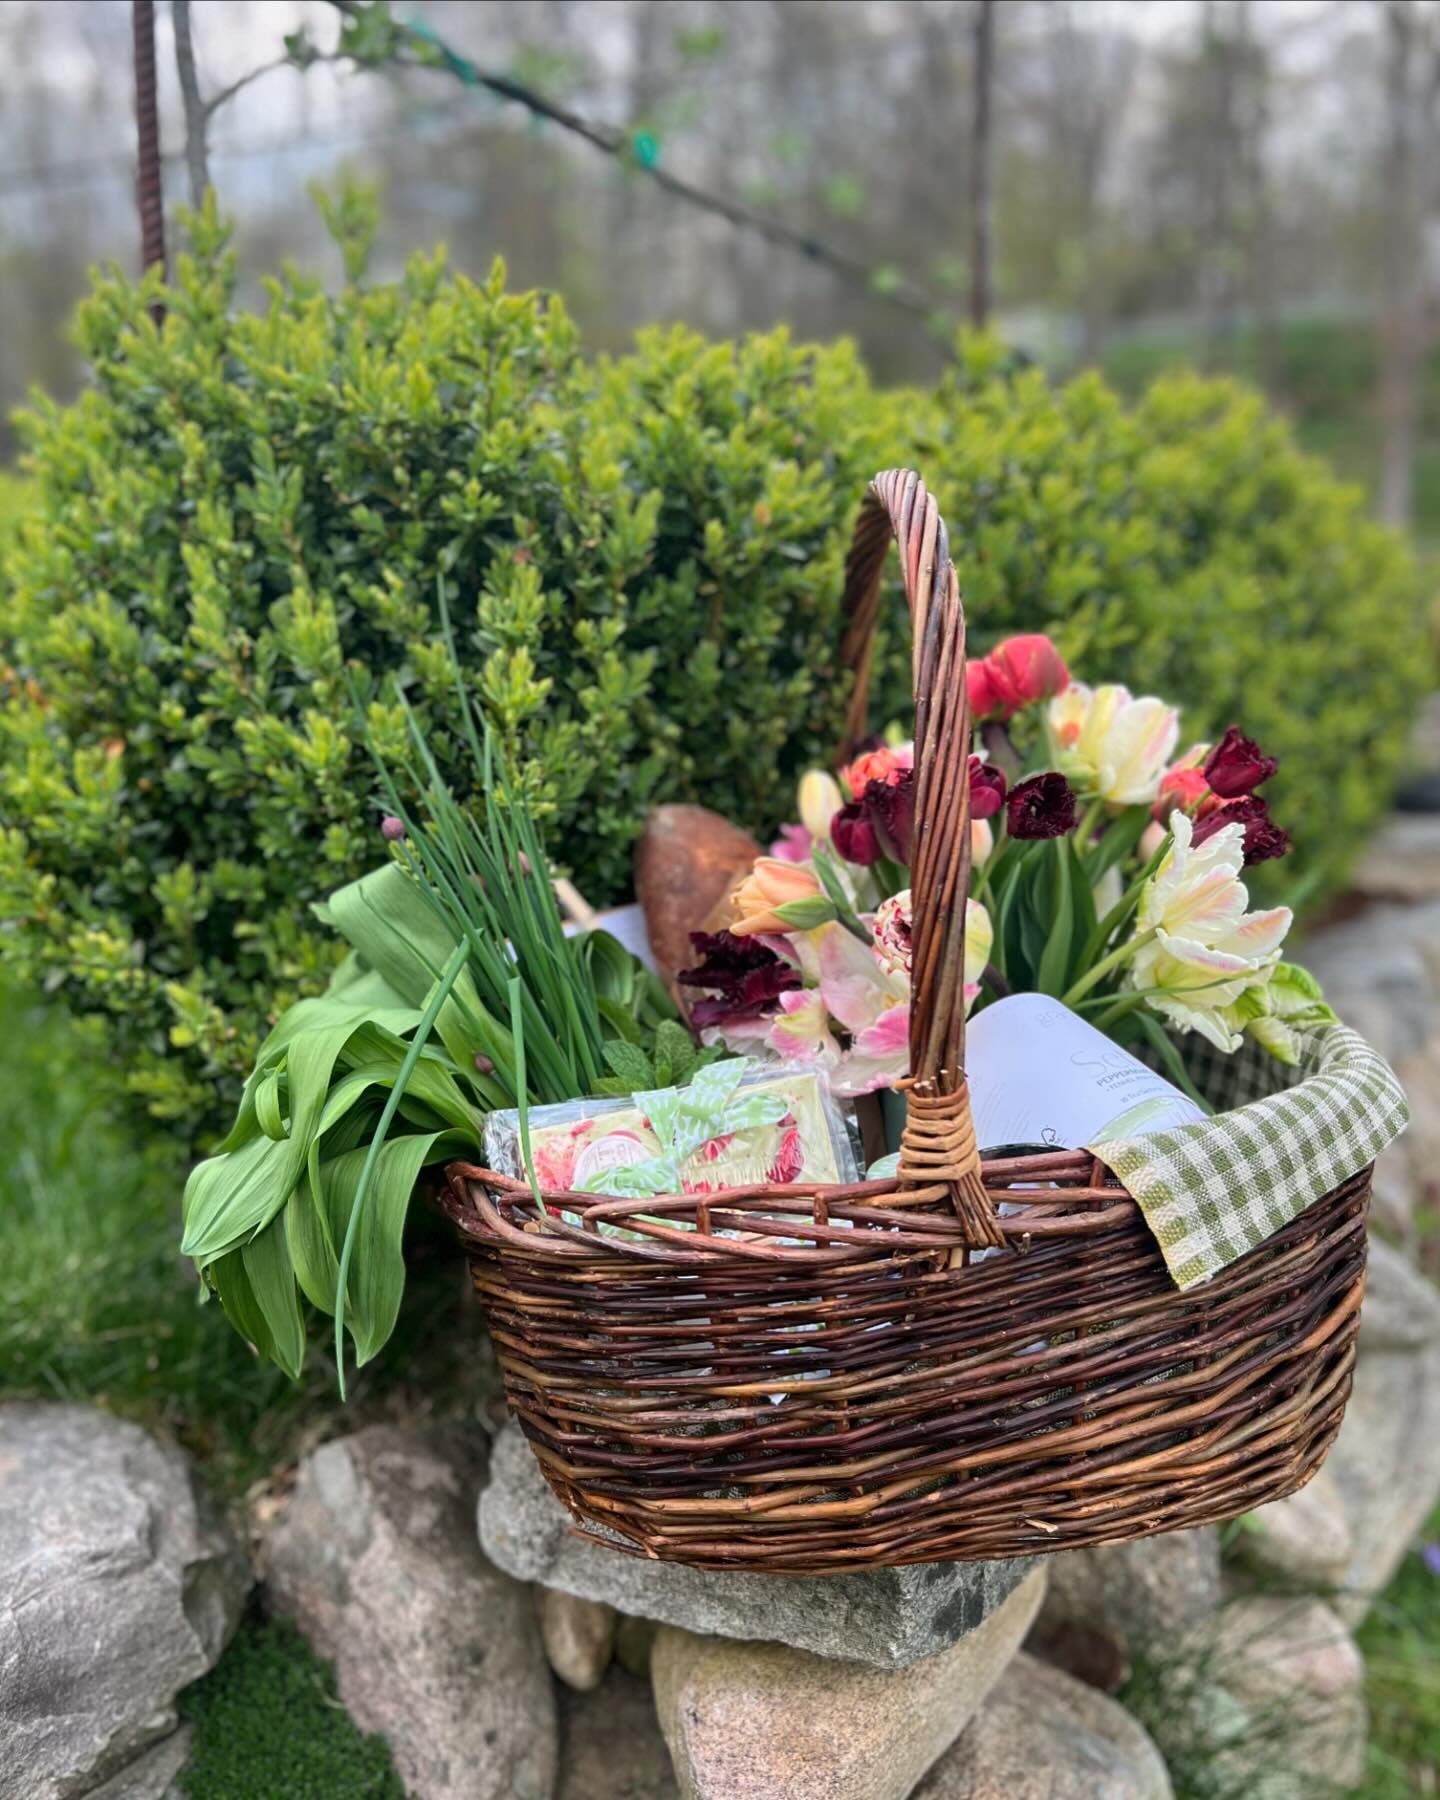 Mother&rsquo;s Day&hellip; just twelve days away! Taking orders for blooms and baskets through Sunday May 5th! Be sure to screenshot and slip into the family shared album 😉 #longfieldfarmct #slowflowers #homegrown #basket #hamper #lfseasonalbasket #